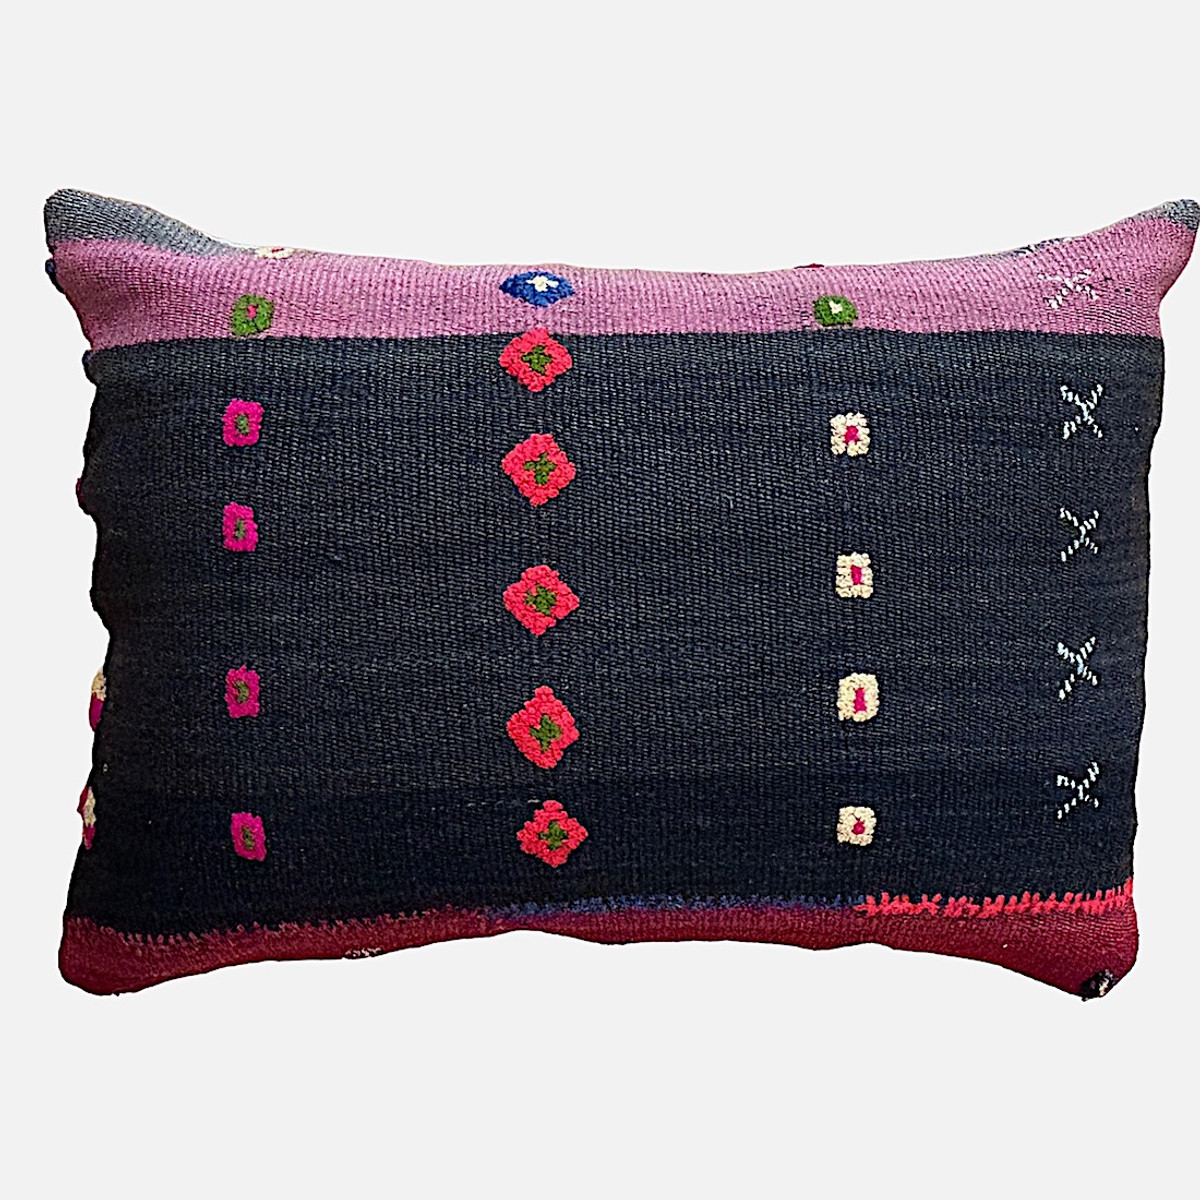 Vintage Wool Kilim Rectangular Pillow D Turkey 15" x 23" Bands of color and brocade woven designs. The pillow is shades of natural wool dark brown to charcoal, cranberry, chalky faded rose. The brocade designs in taupe, gold, hot pink, bright red orange, bright olive, indigo blue and tan